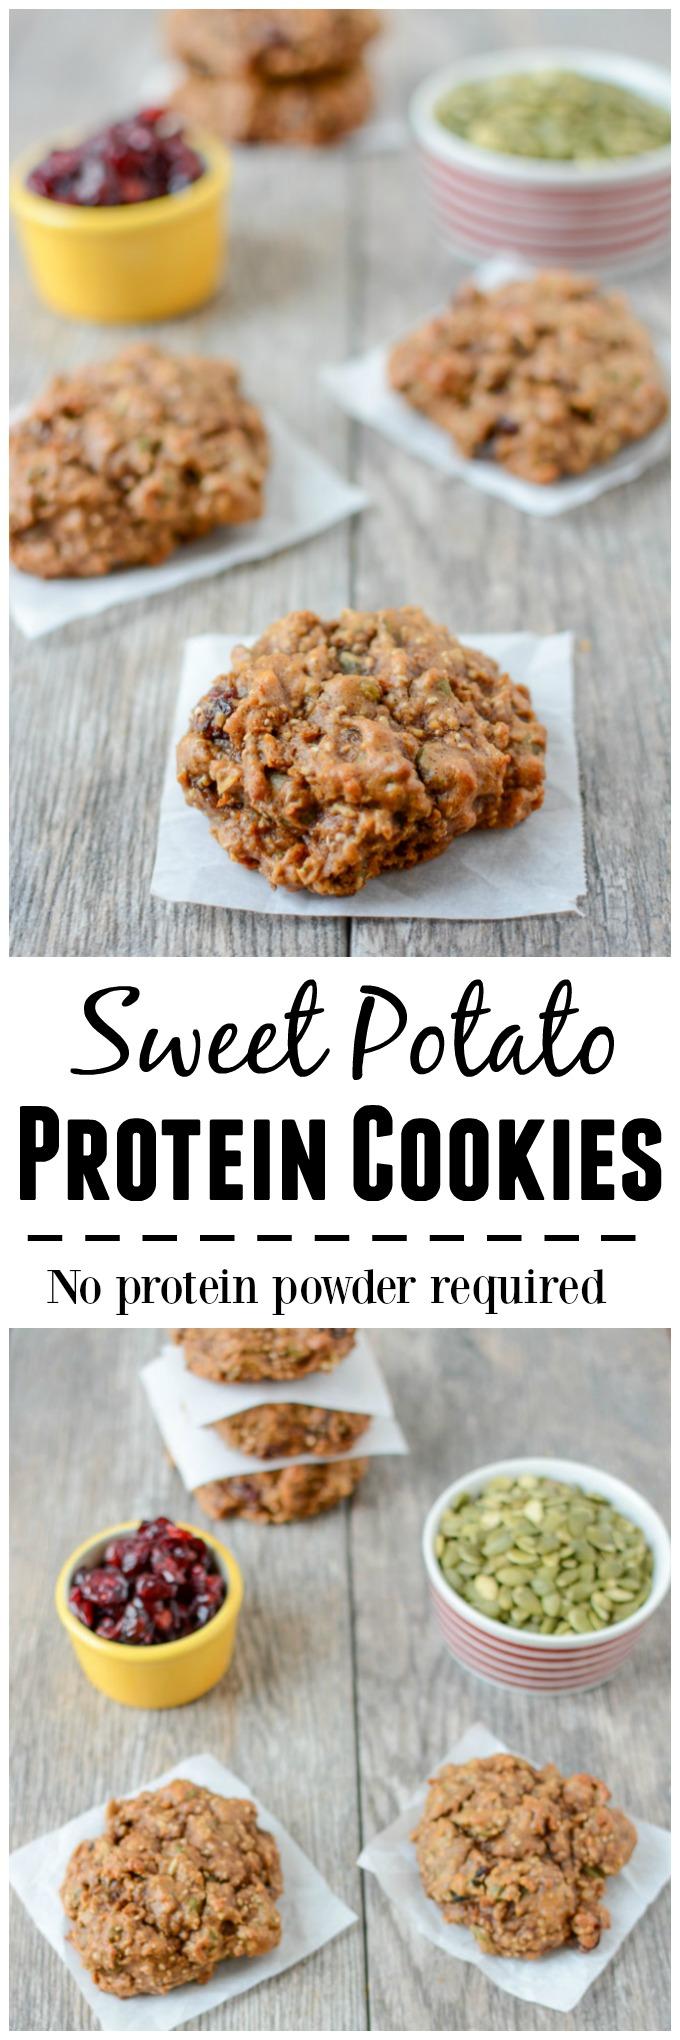 These Healthy Sweet Potato Cookies are perfect for breakast or snack! They're gluten-free, made with real food ingredients and packed with protein and fiber. Enjoy them for breakfast or an afternoon snack!